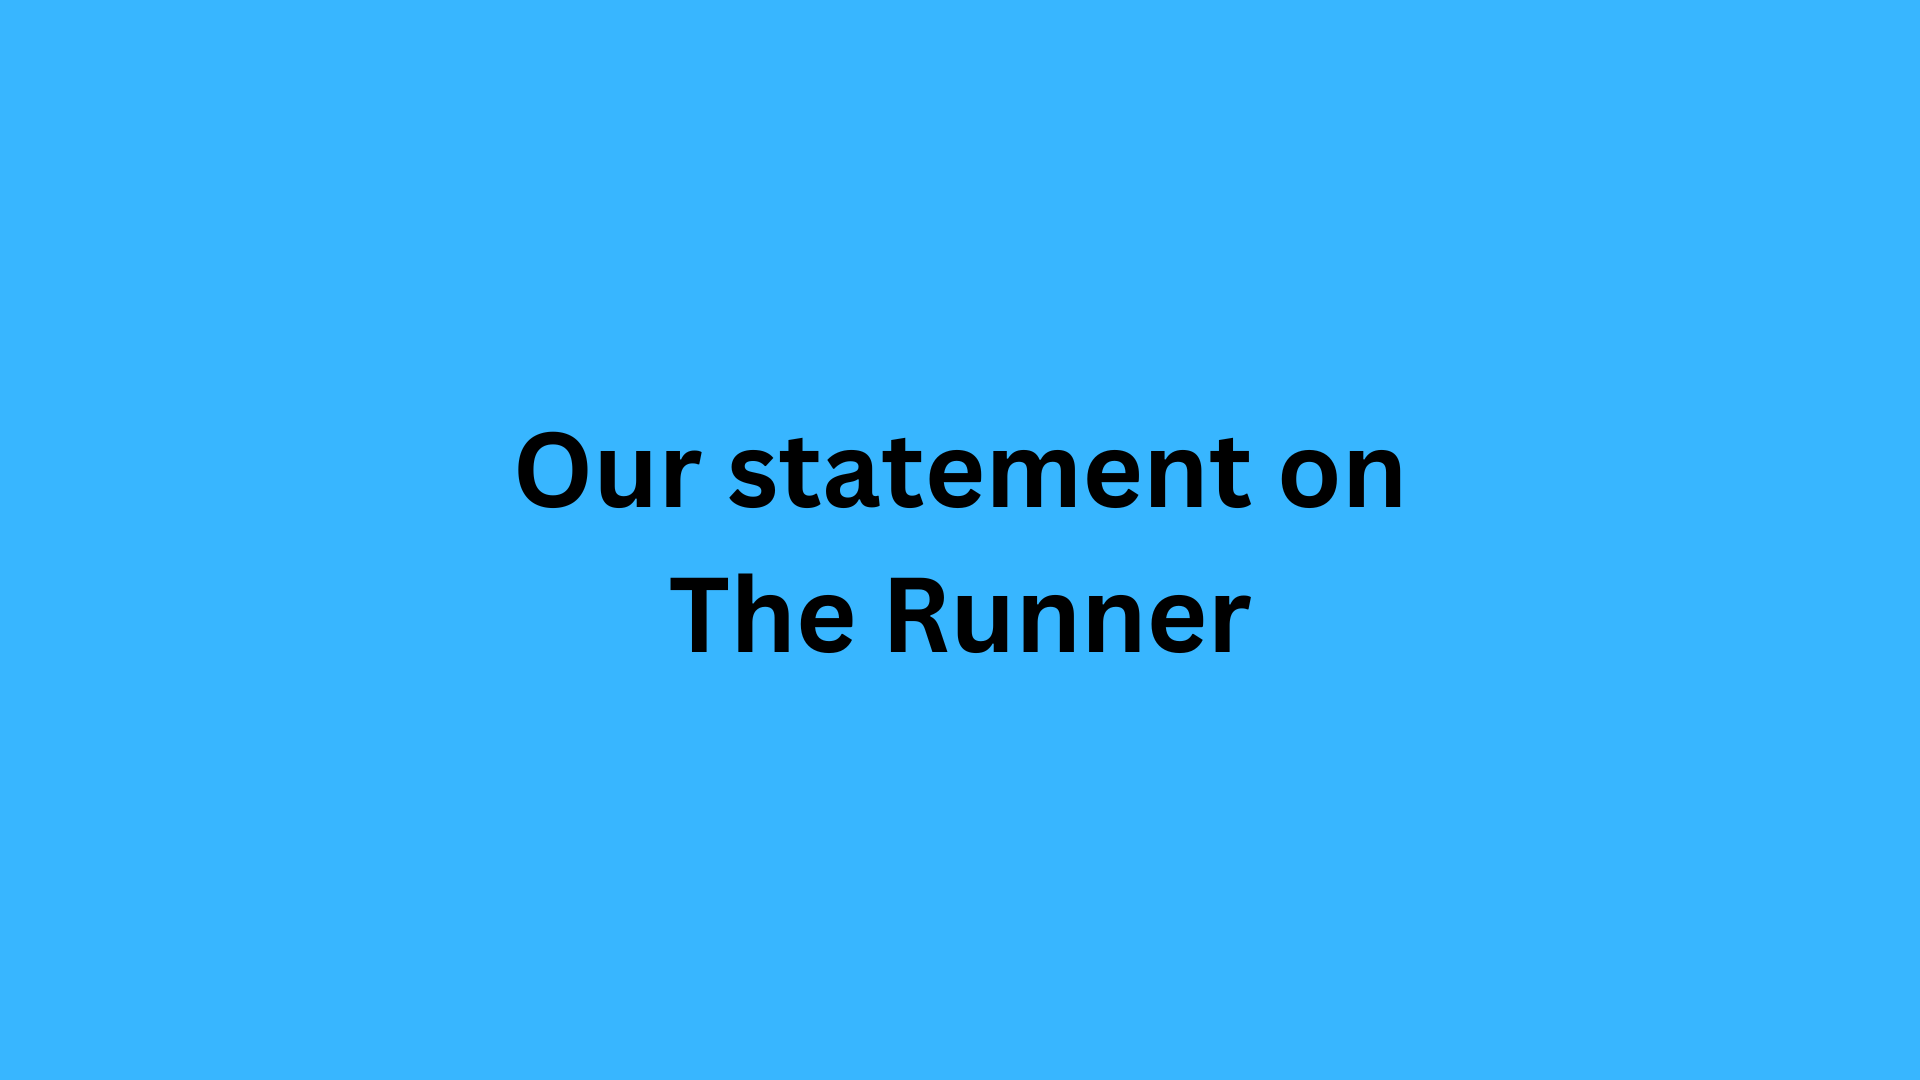 Our statement on The Runner.